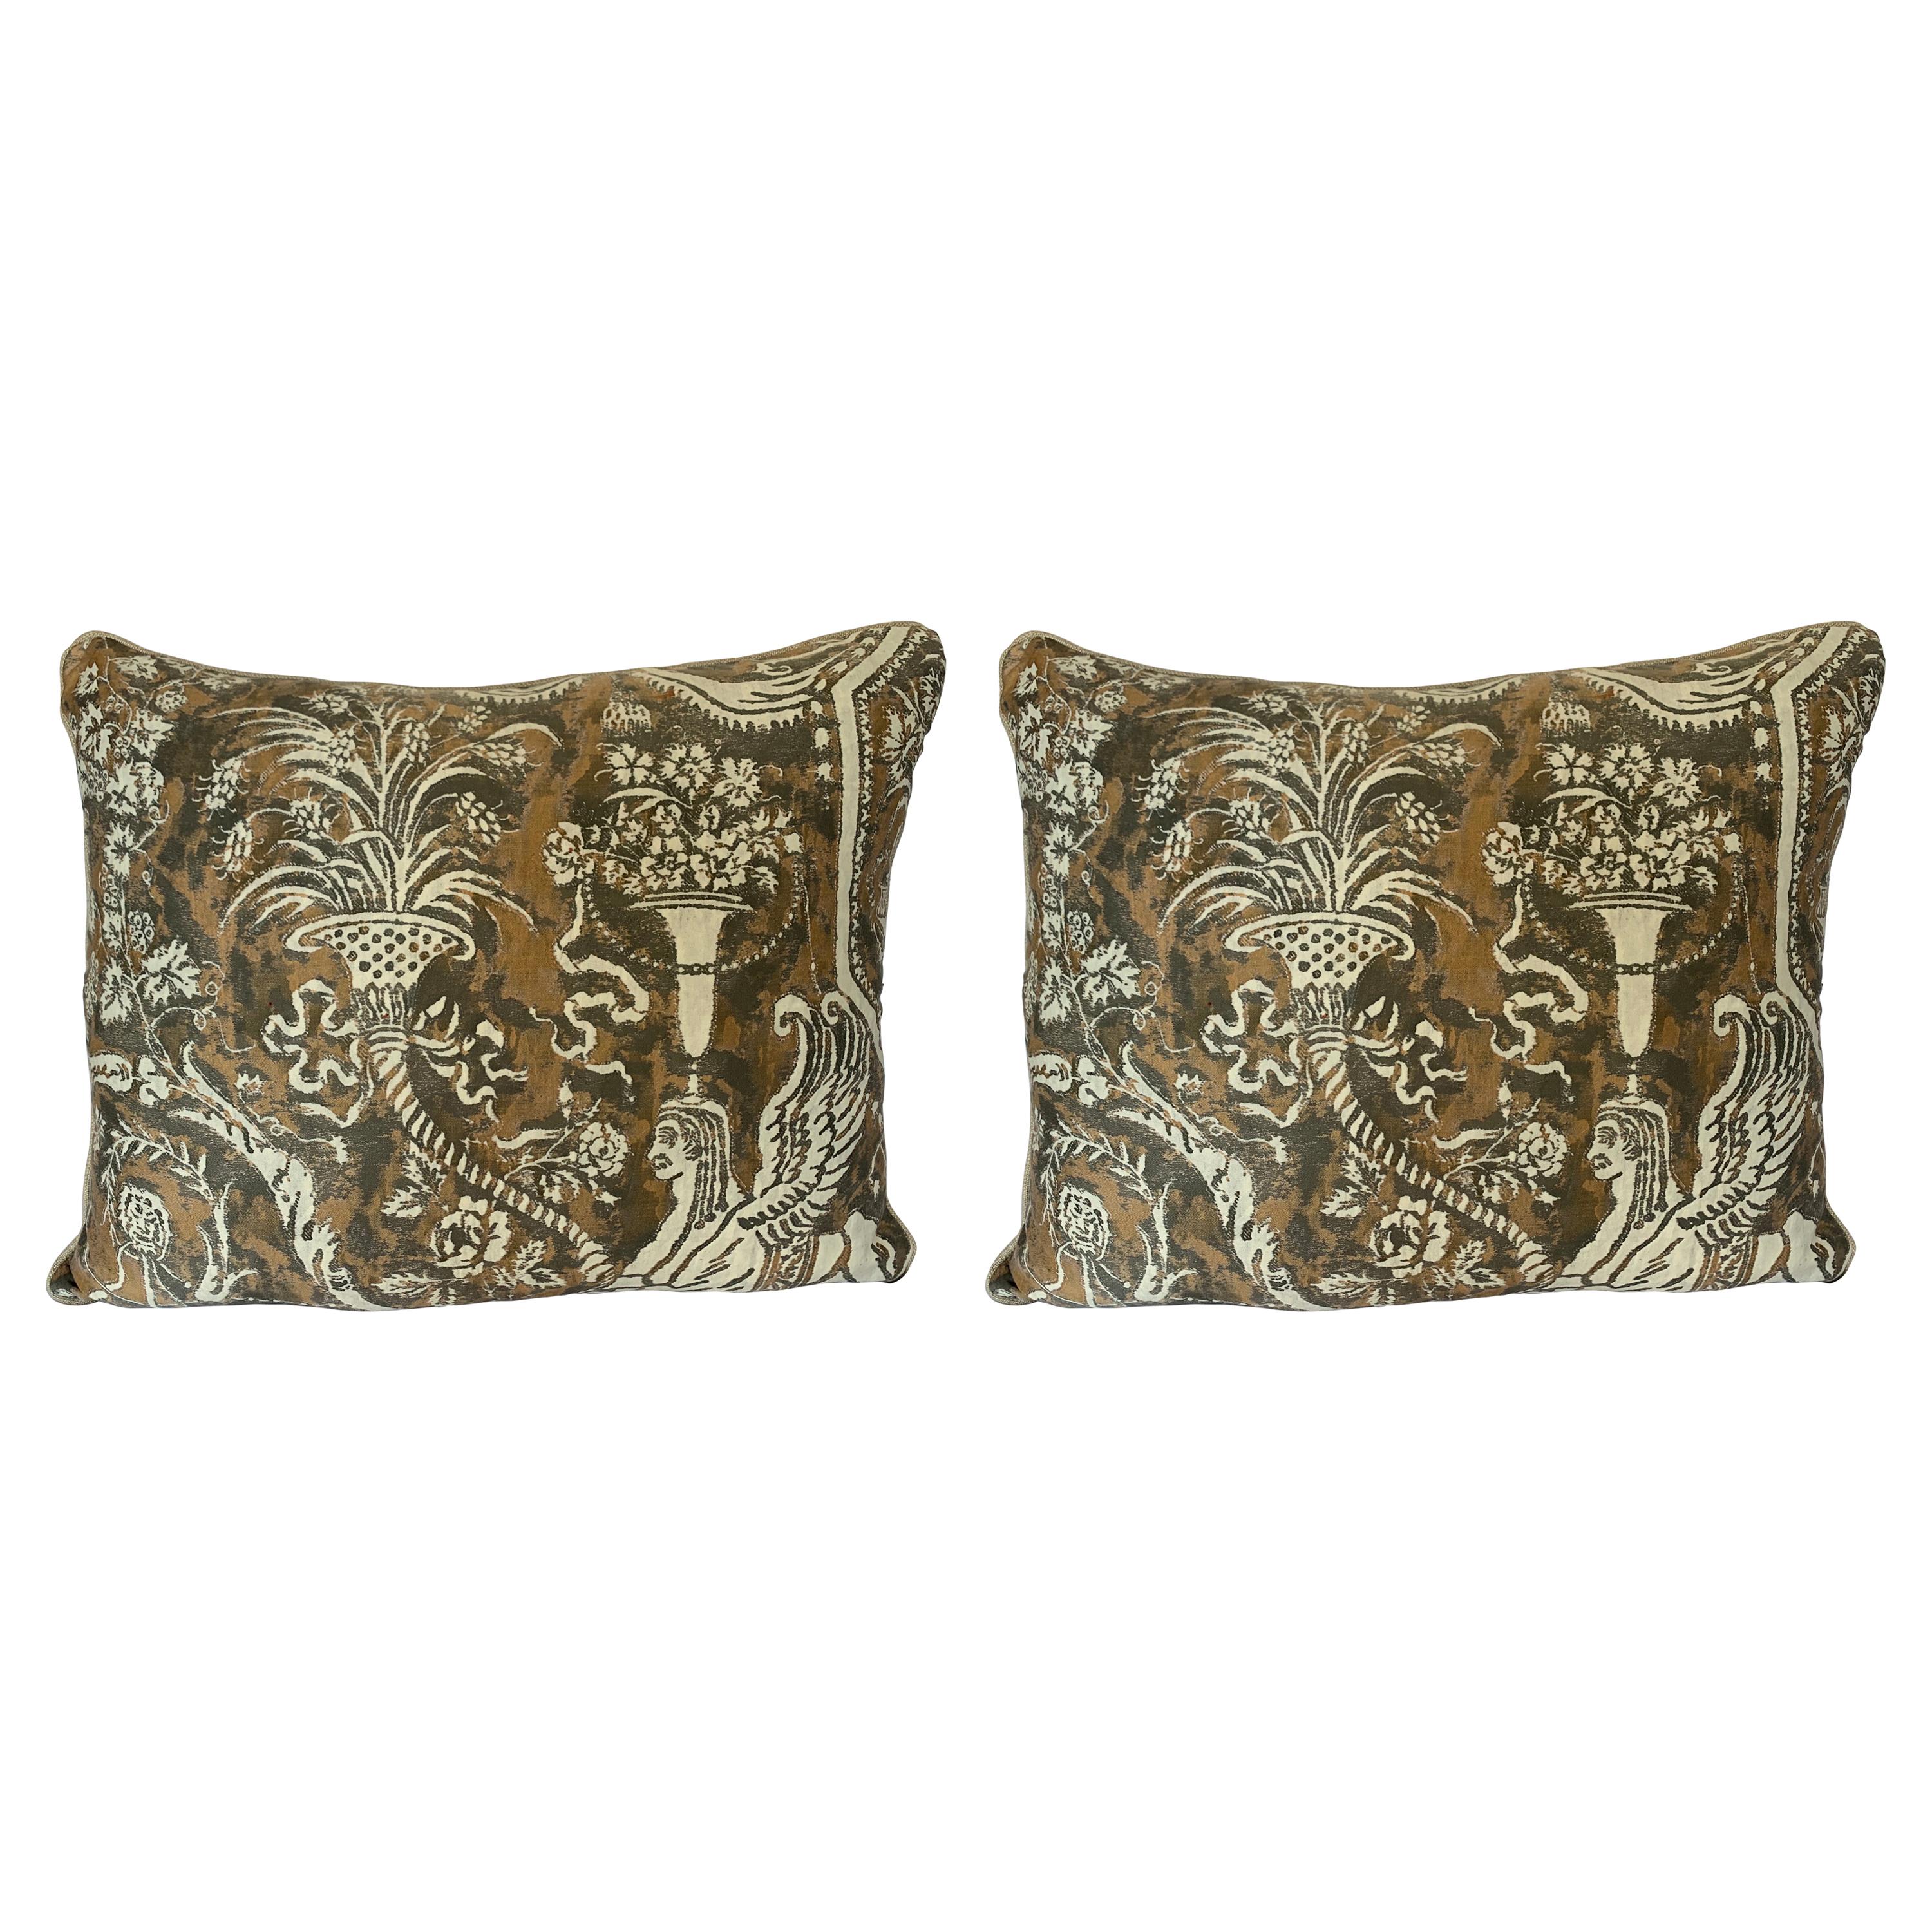 Pair of Unique Fortuny Pillows w/ Sphinxes For Sale